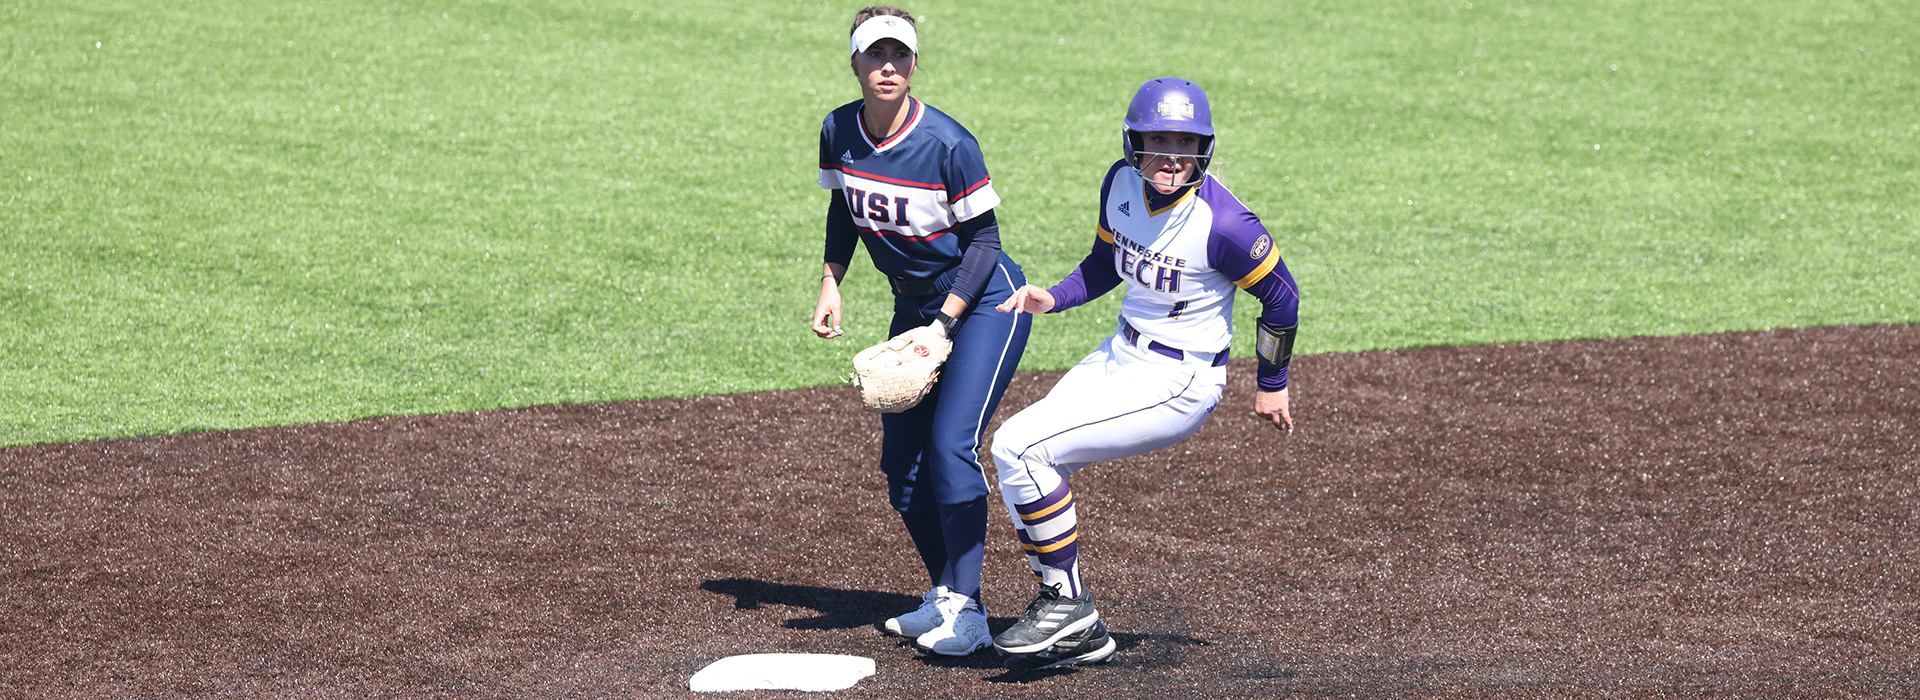 Southern Indiana avoids sweep, tops Golden Eagles in finale